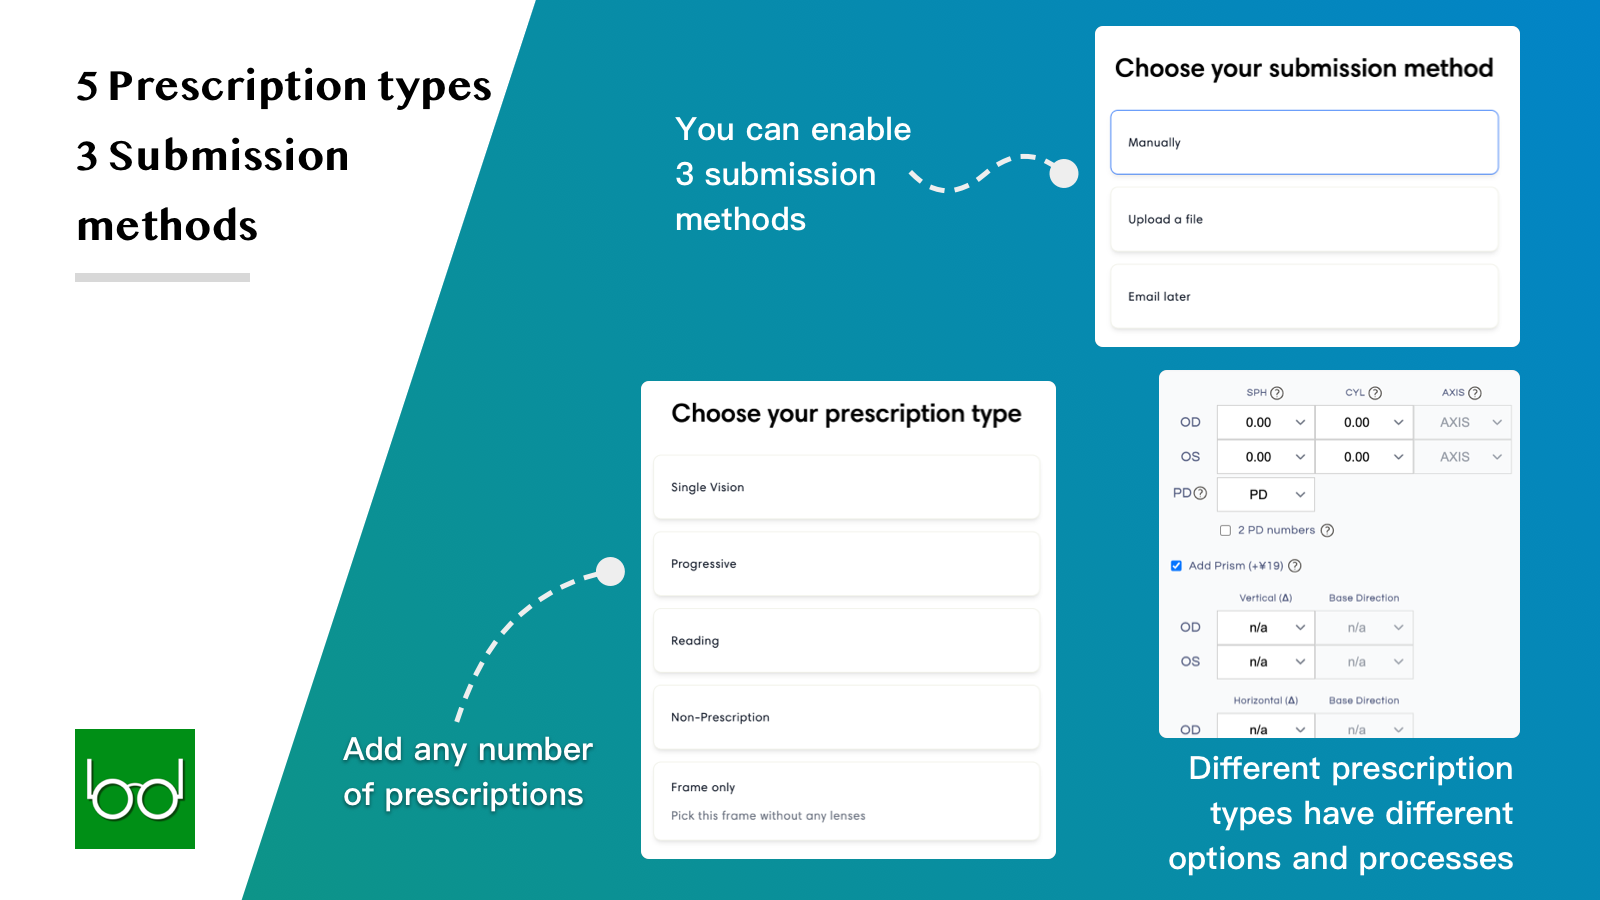 5 prescription types and 3 submission methods